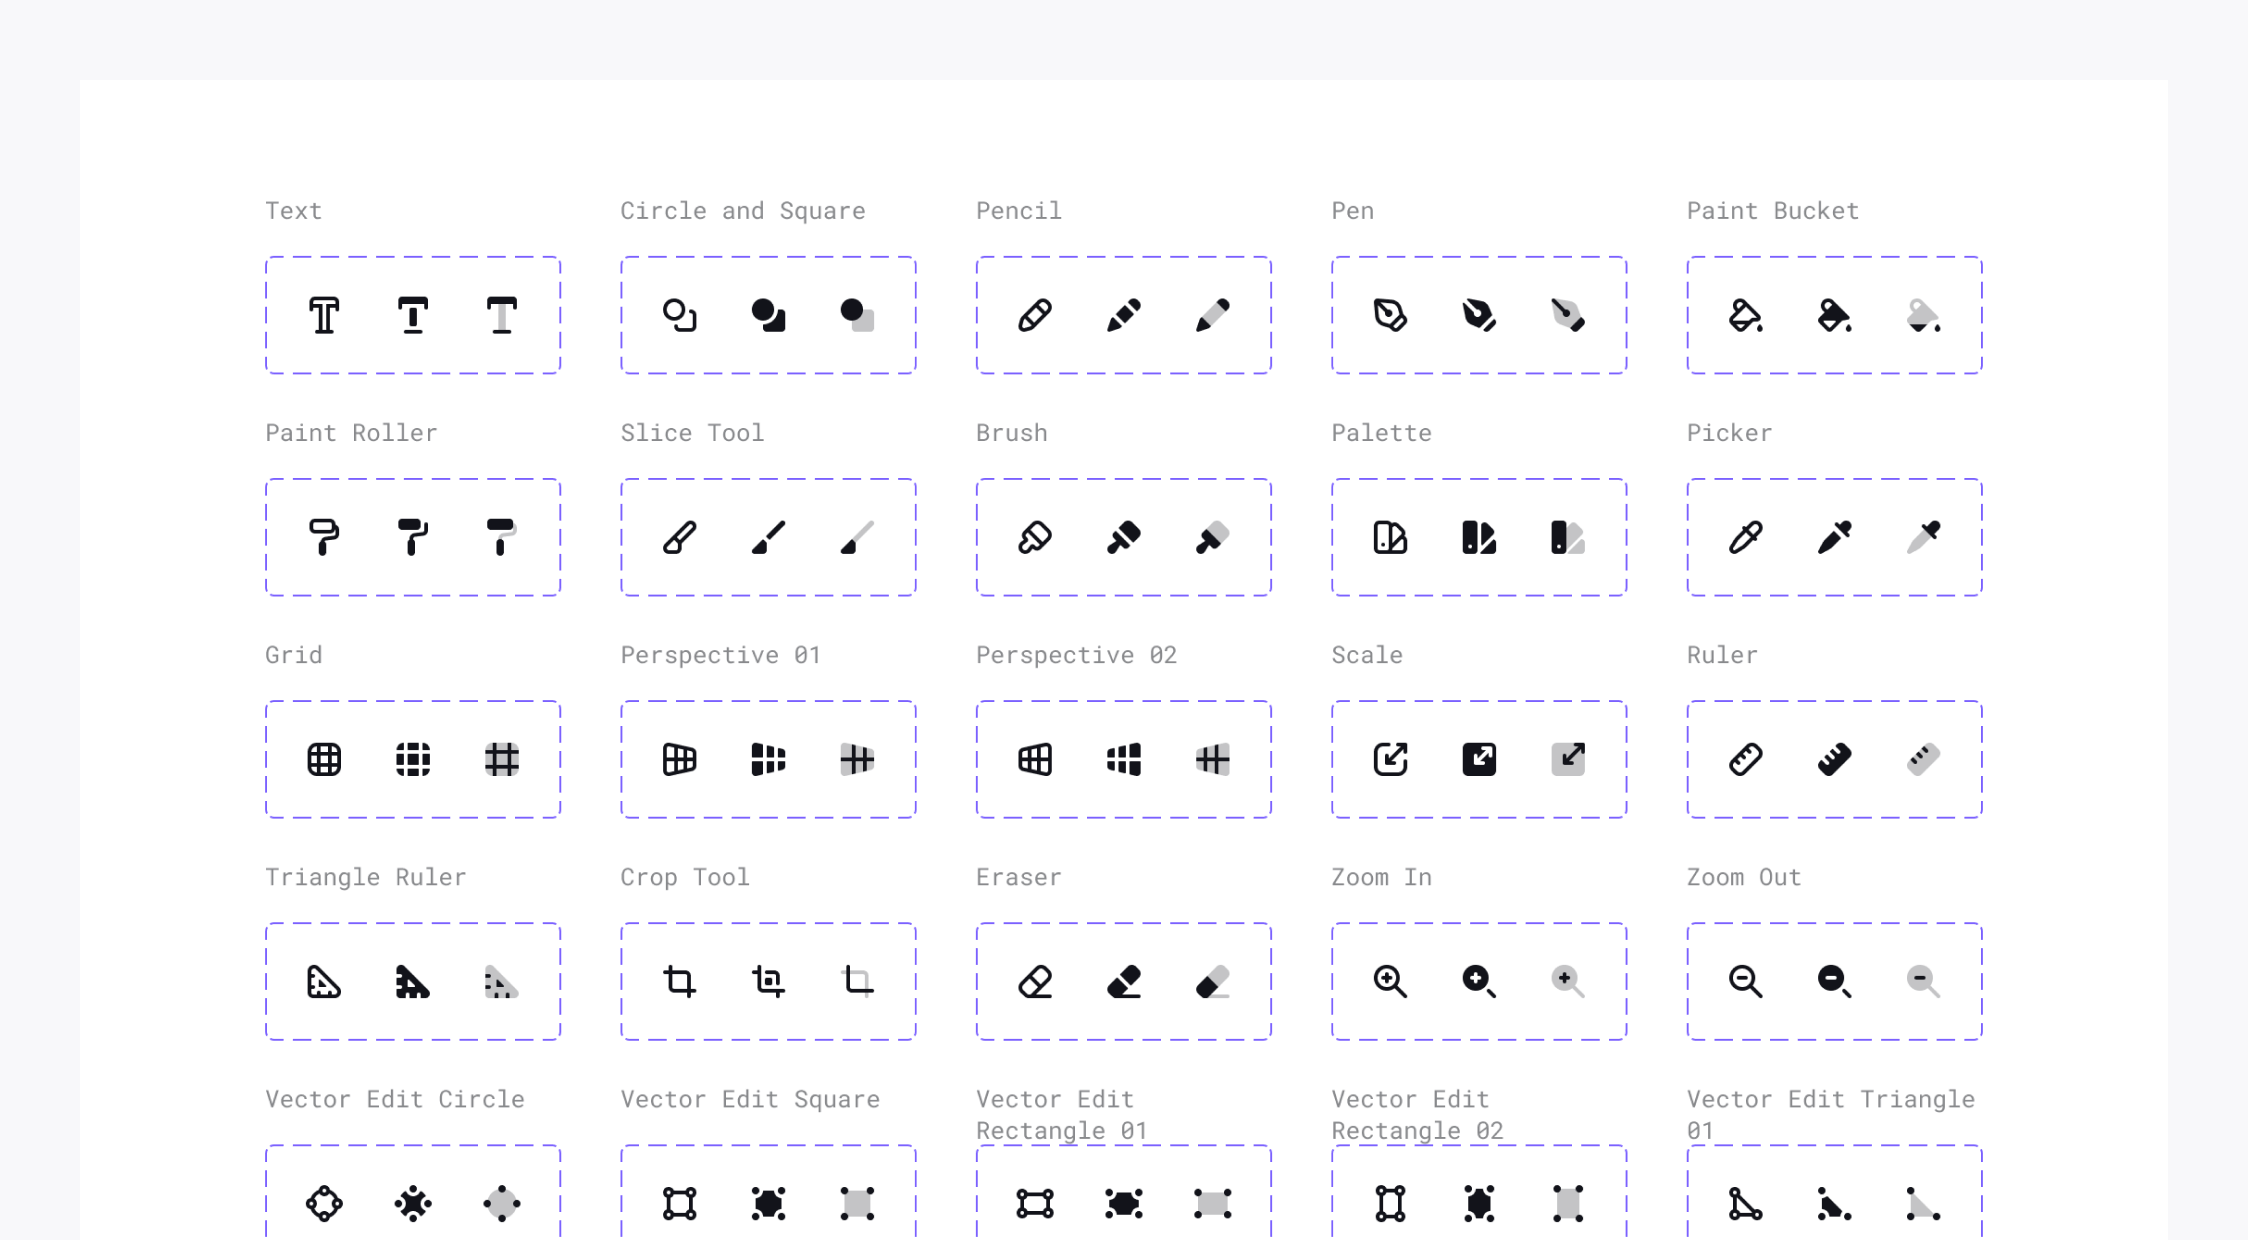 Design icon set in Universal Icon Set in Figma. Icons for text, circle and square, pencil, pen, paint bucket, paint roller, slice tool, brush, palette, picker, grid, perspective, scale, ruler, triangle ruler, crop tool, eraser, zoom in, zoom out, vector edit circle, vector edit square, and vector edit triangle.